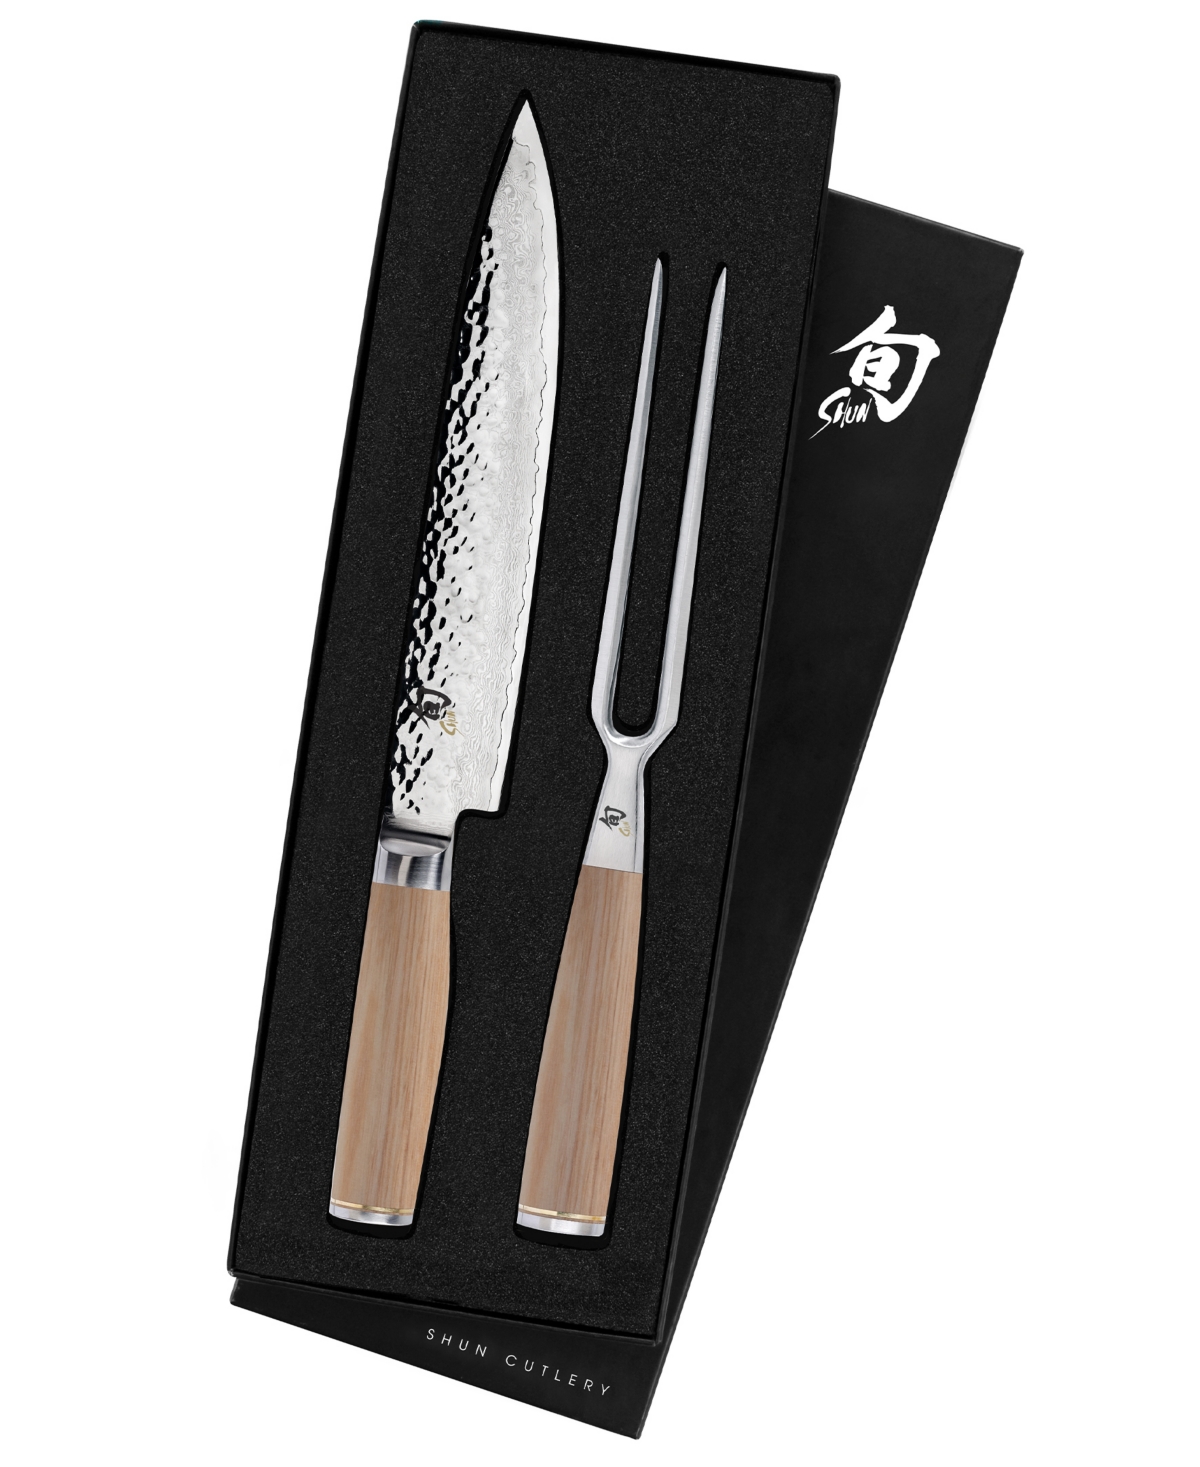 Shop Shun Stainless Steel Premier 2 Pc Carving Set: Slicing Knife 9.5" And Carving Fork In A Boxed Set. In Beige